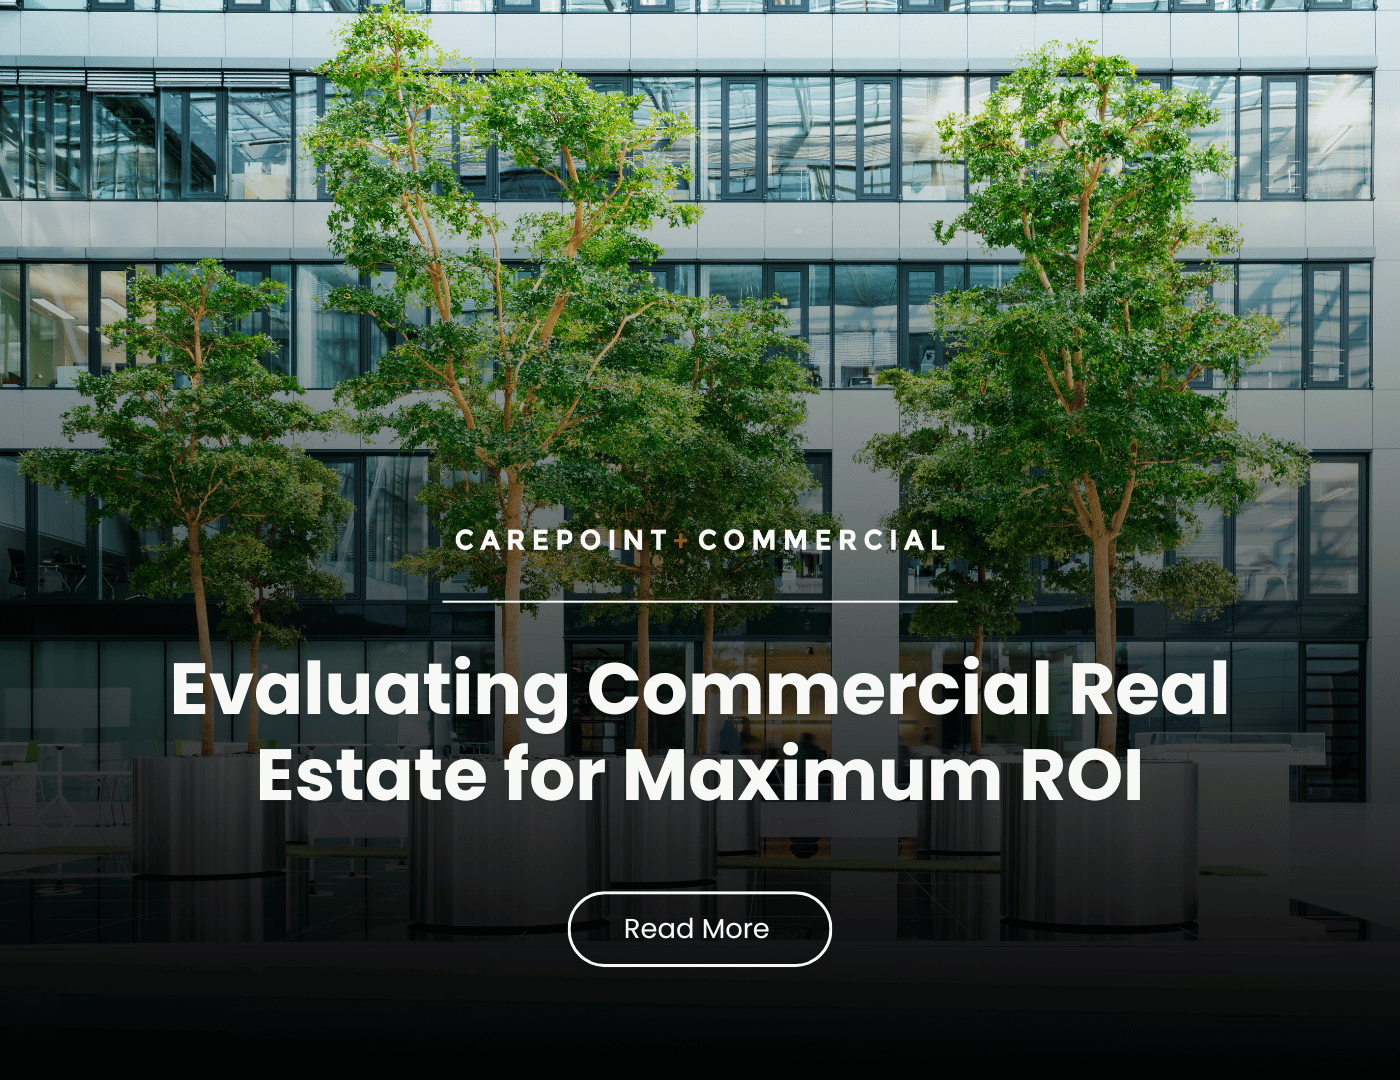 How to Evaluate Commercial Real Estate Properties for Maximum ROI